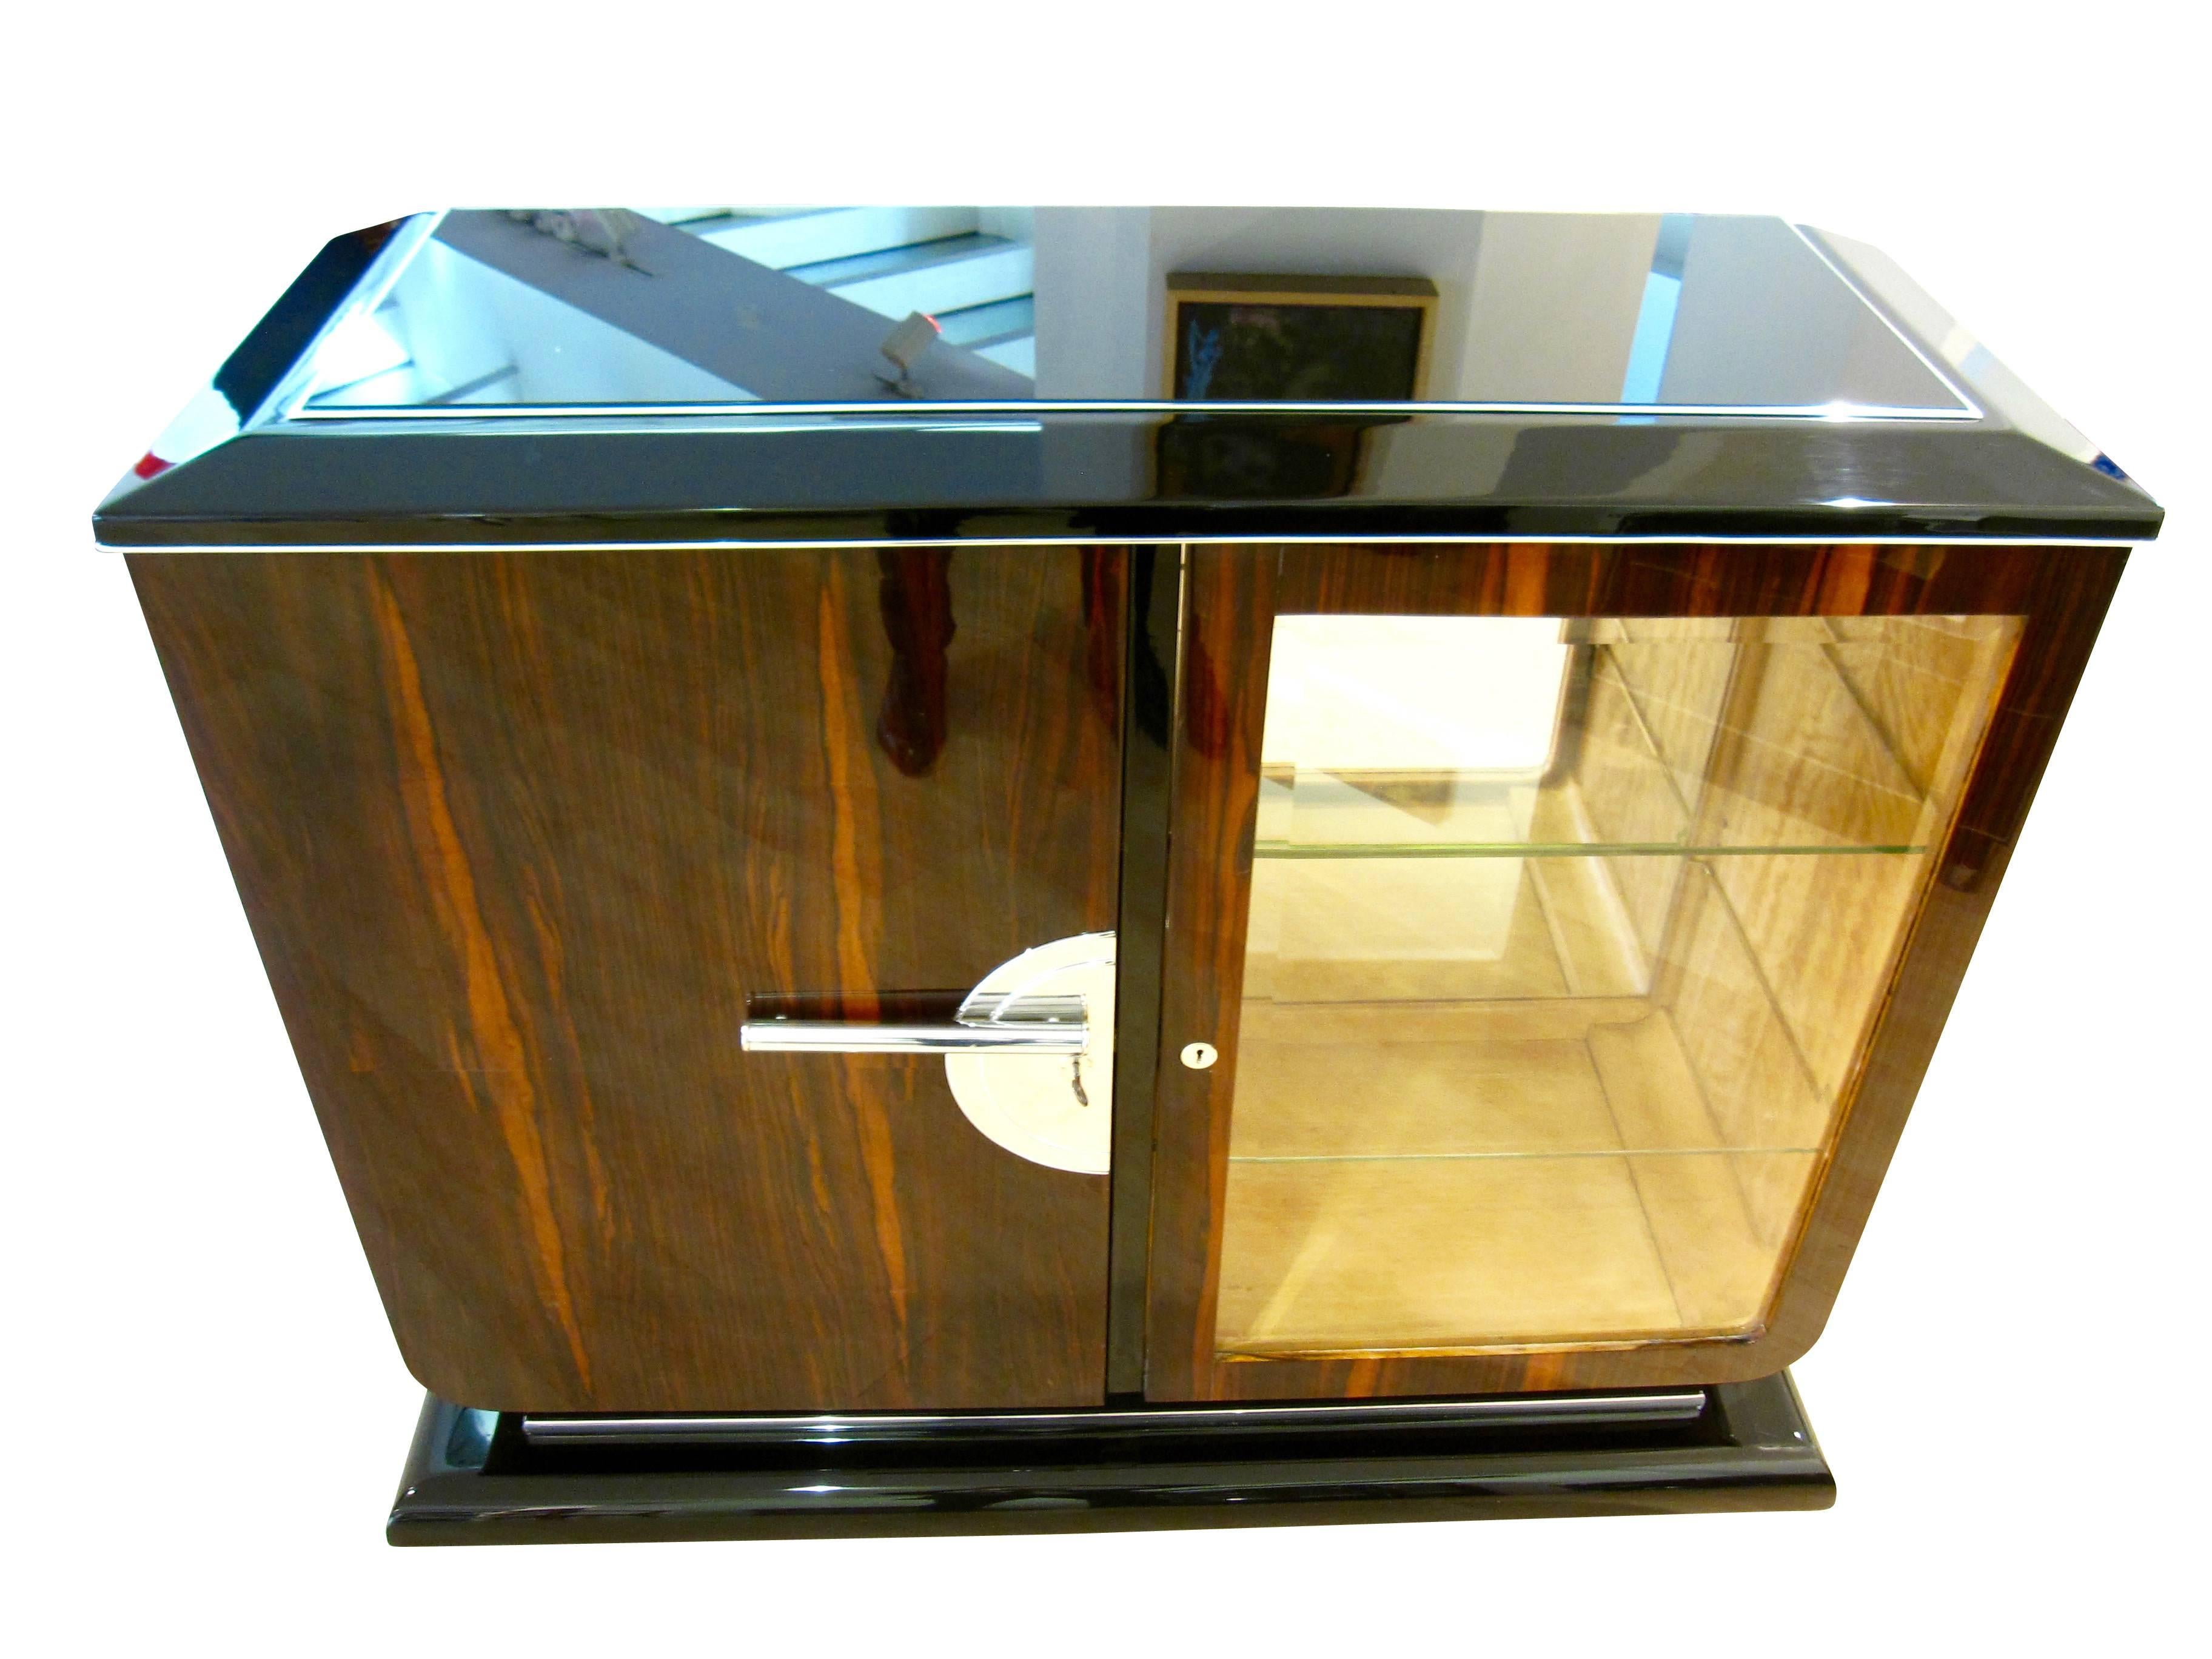 Elegant Art Deco sideboard in Macassar from France, circa 1925.
 
The front and both sides are veneered with Macassar of an especially beautiful grain. Bottom and top are black lacquered wood and polished to high-gloss.
There is an integrated bar